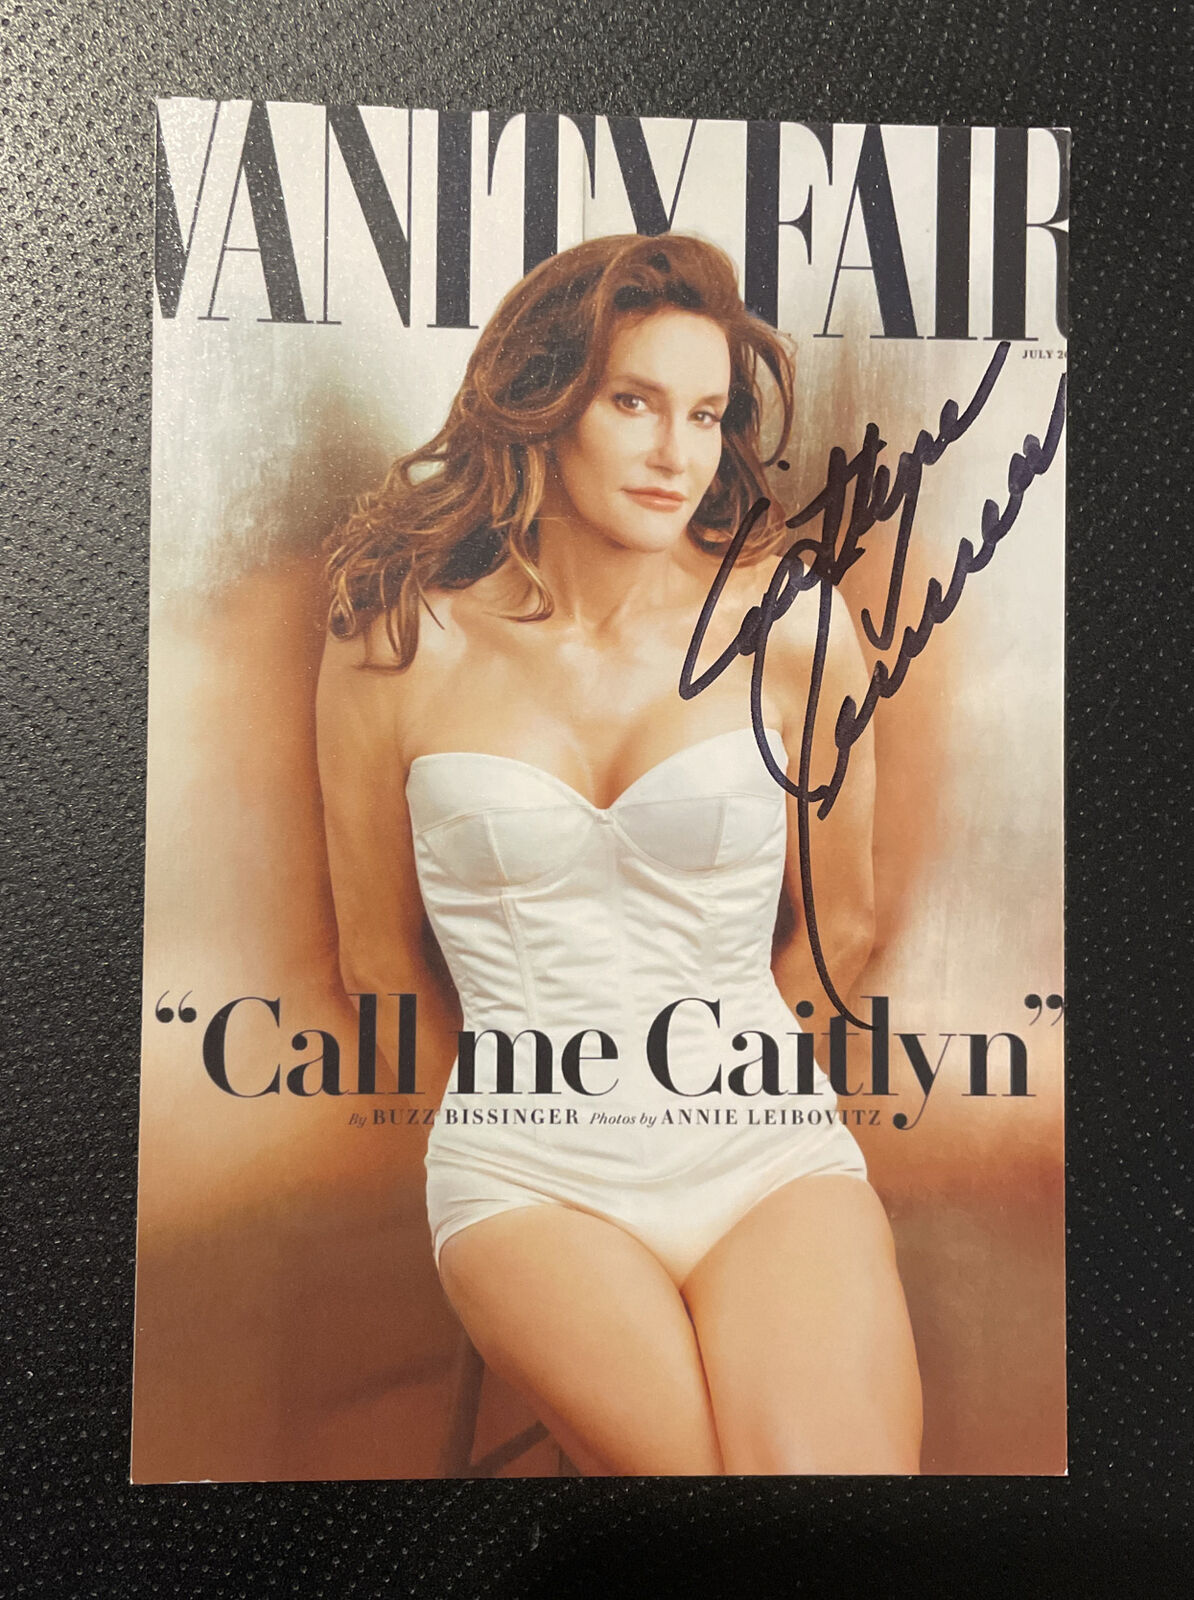 Caitlyn Jenner HAND Signed 6x4 Photo Poster painting Vanity Fair Autograph TV Personality